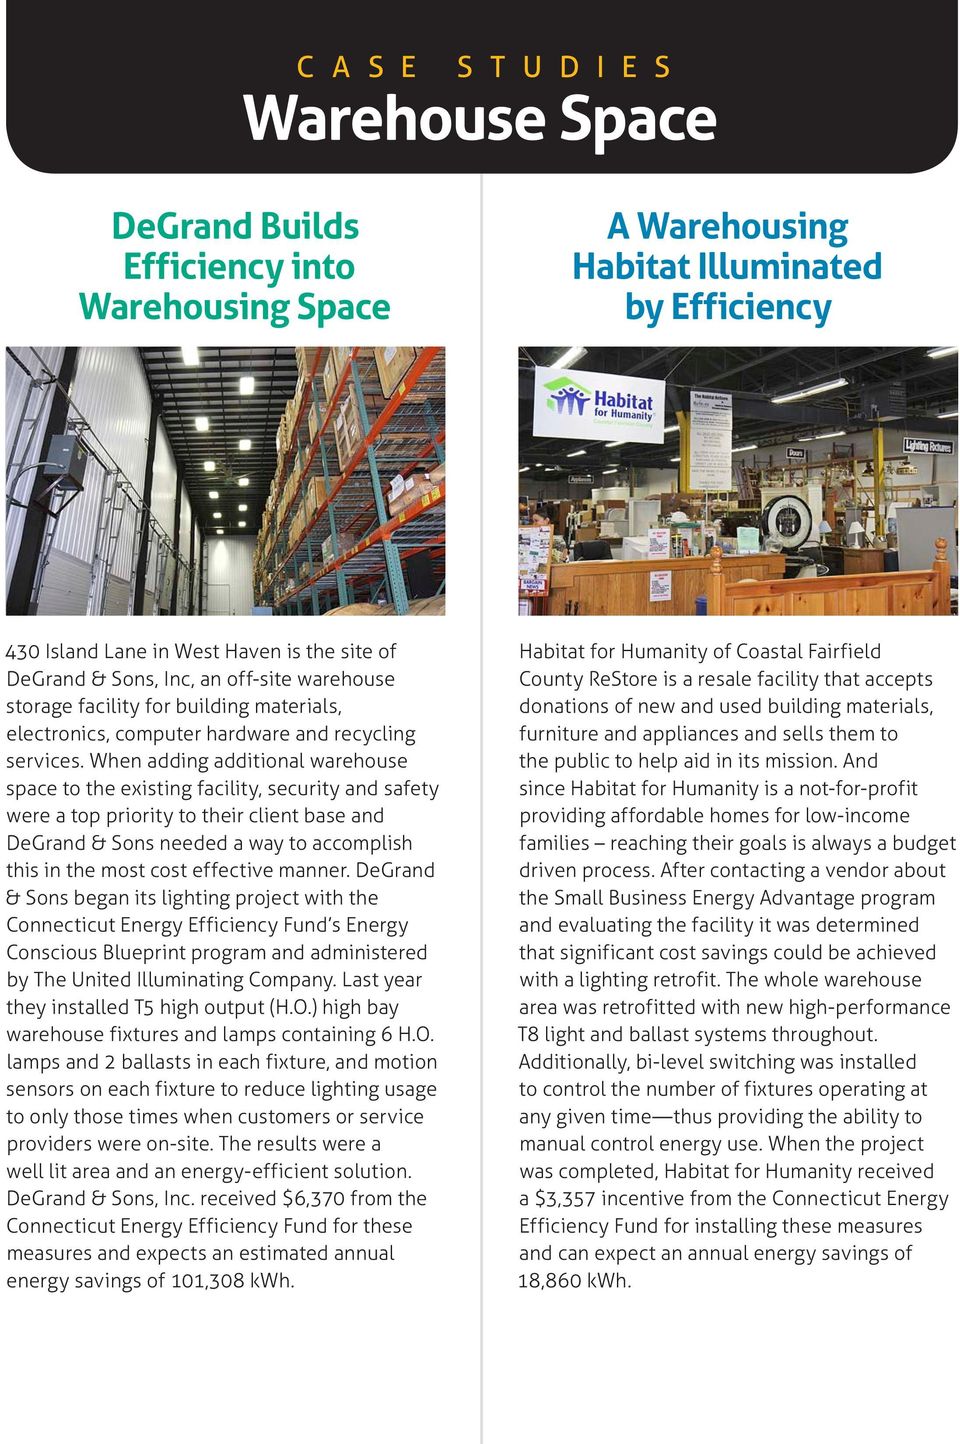 When adding additional warehouse space to the existing facility, security and safety were a top priority to their client base and DeGrand & Sons needed a way to accomplish this in the most cost